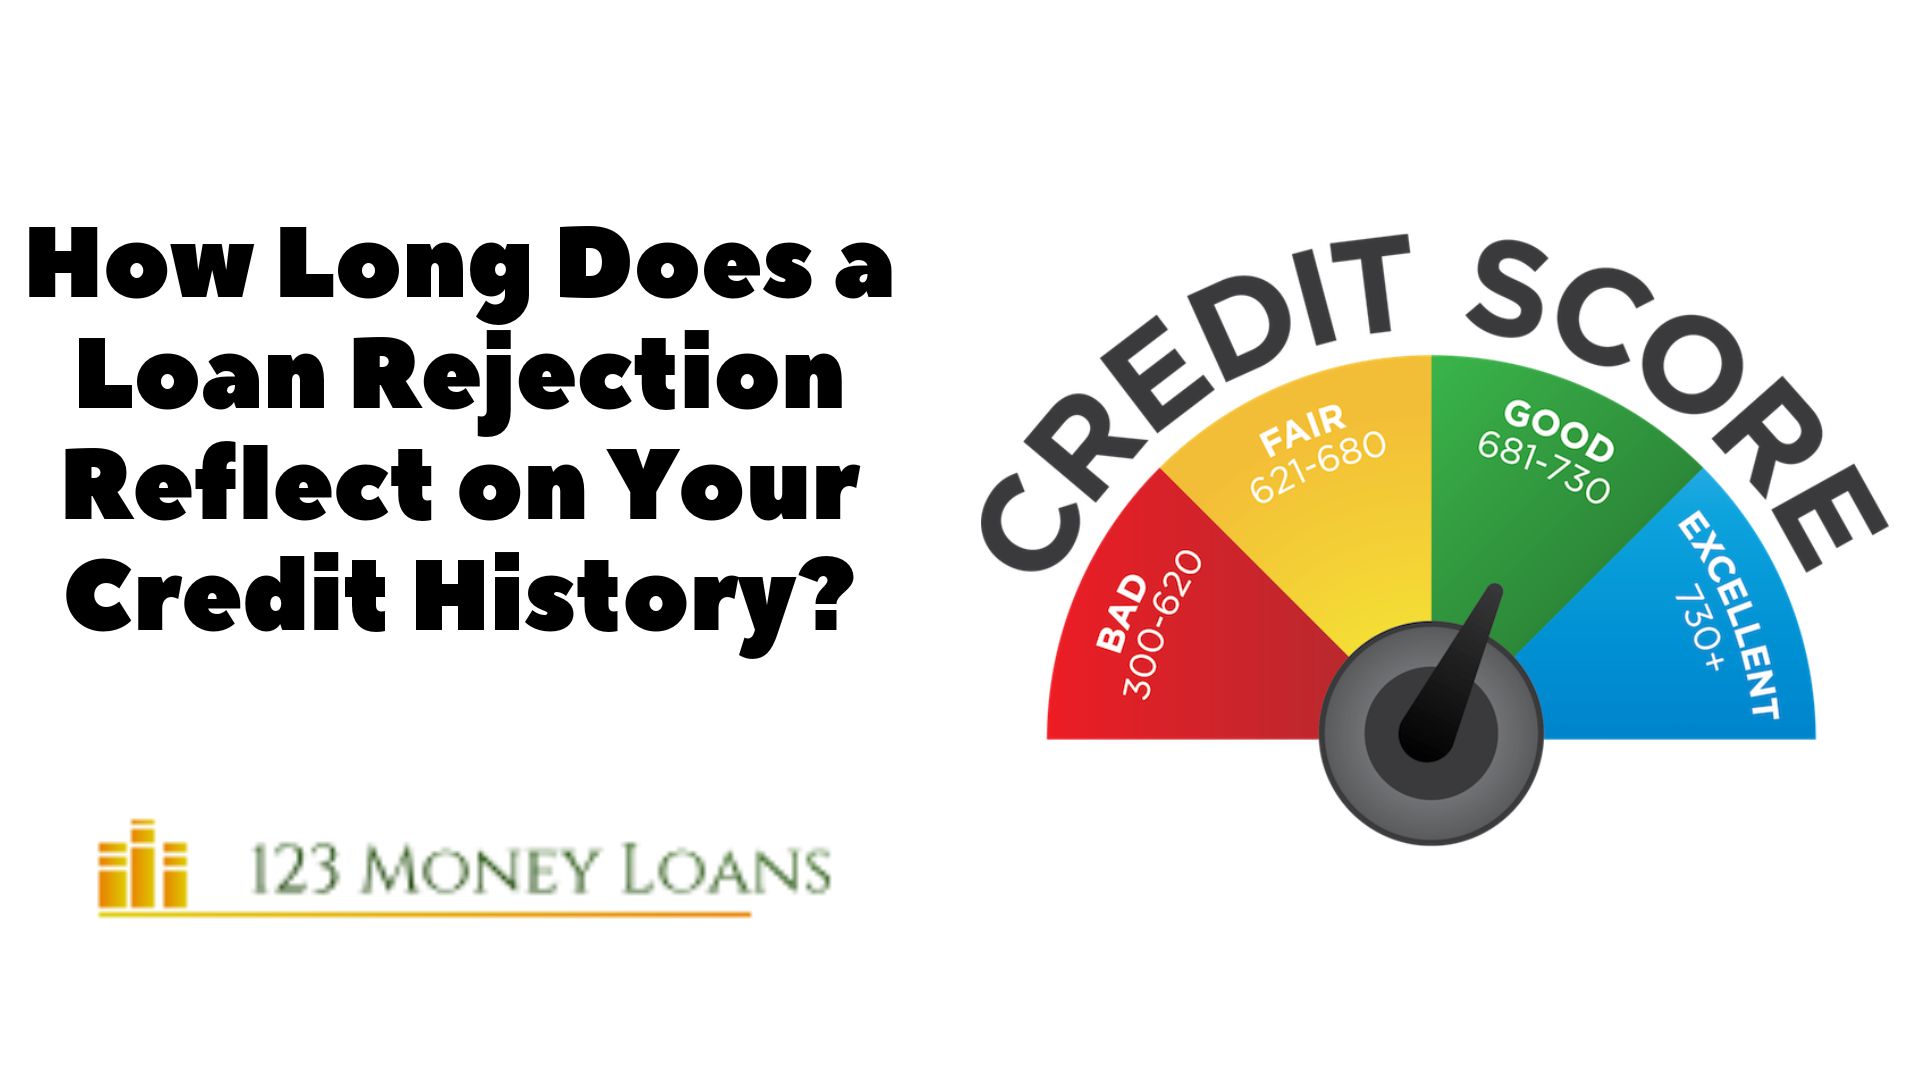 How Long Does a Loan Rejection Reflect on Your Credit History?